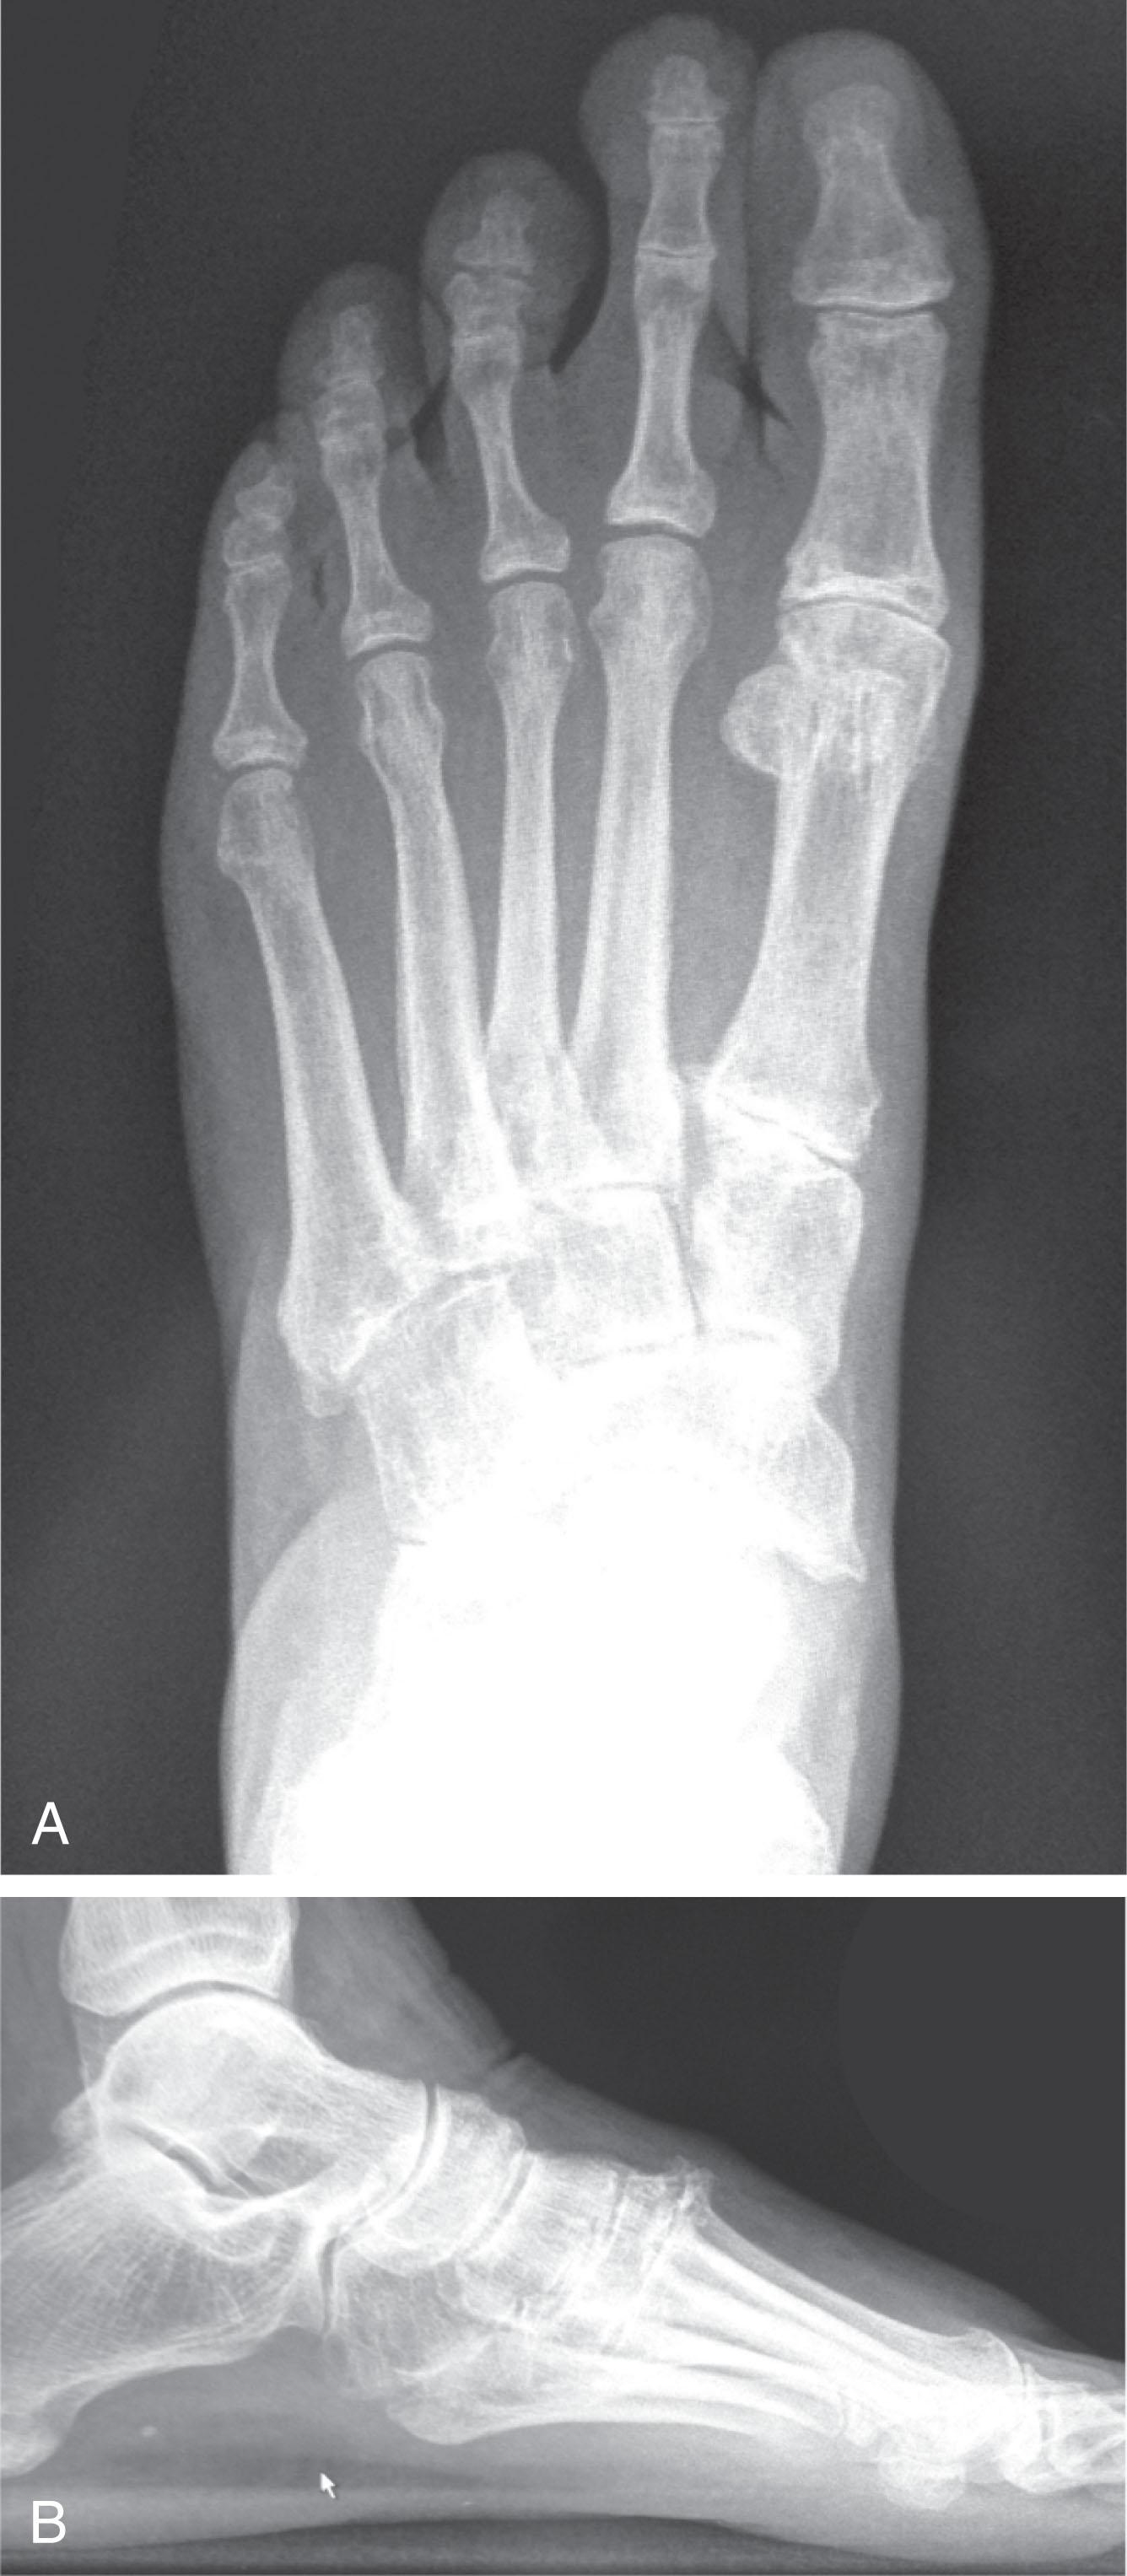 Fig. 21-5, A and B , Weight-bearing anteroposterior and lateral radiographs demonstrate degenerative arthritis of the tarsometatarsal joints.